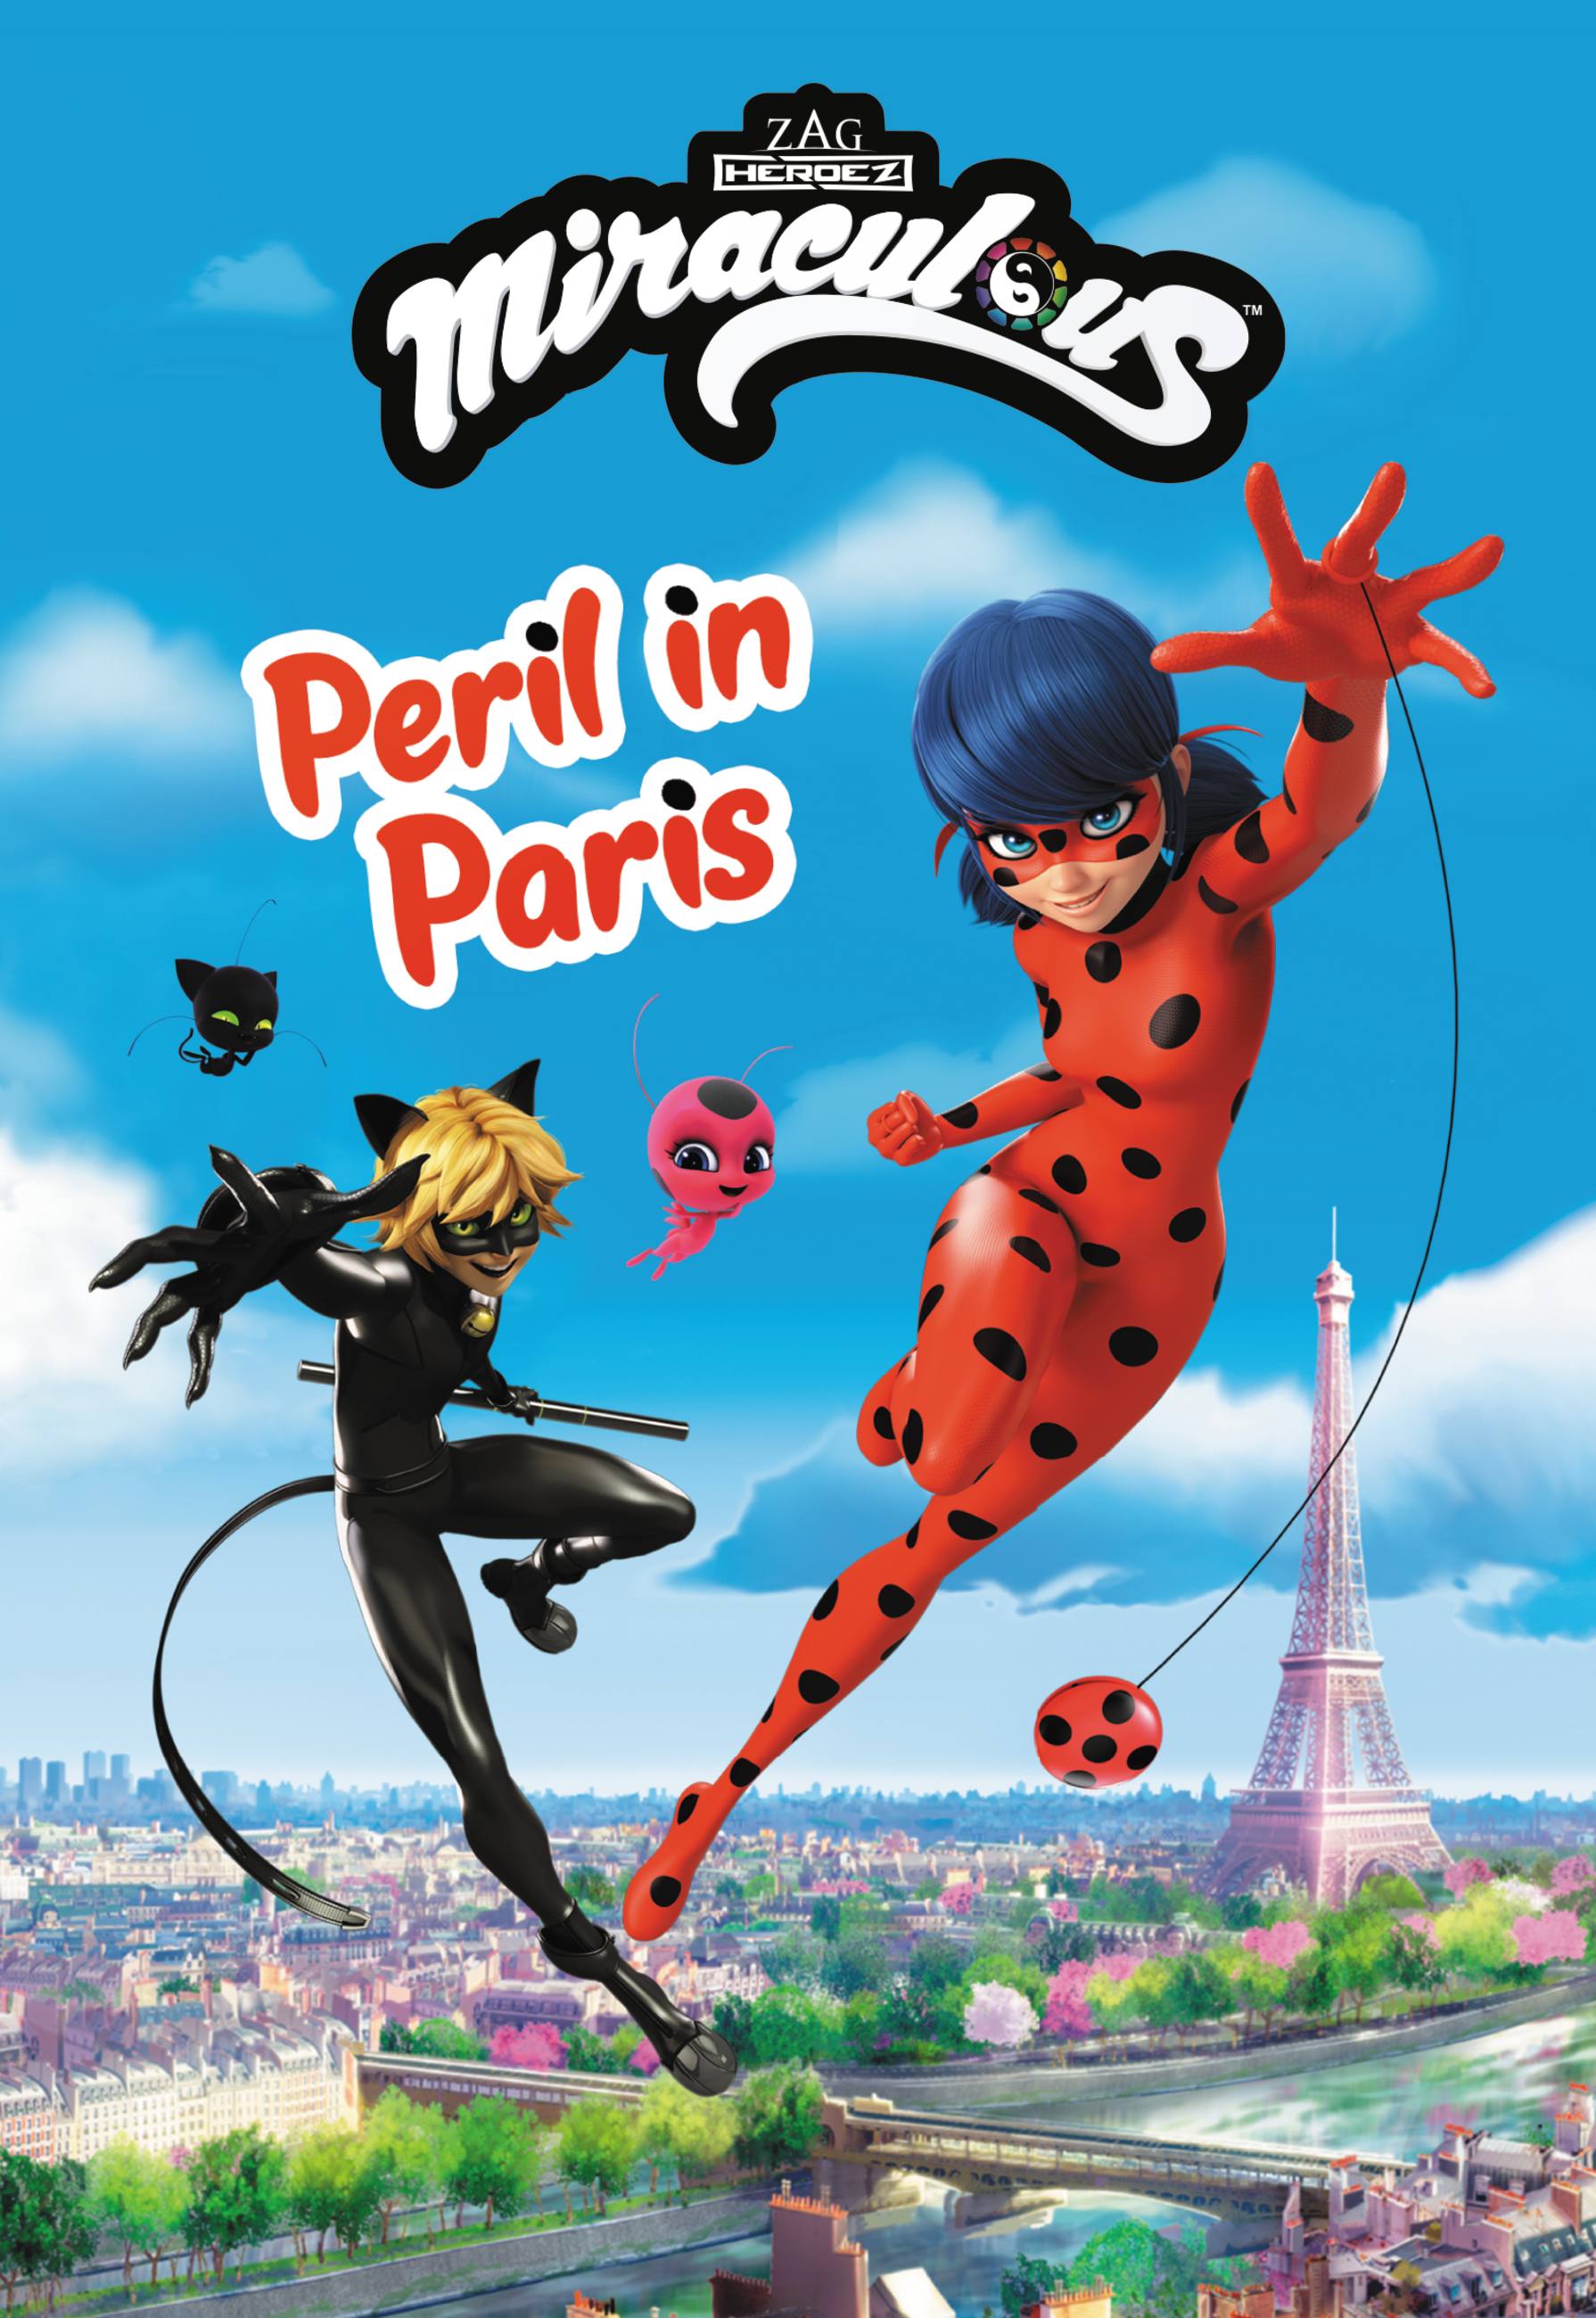 About: Miraculous Ladybug: Coloring (Google Play version)